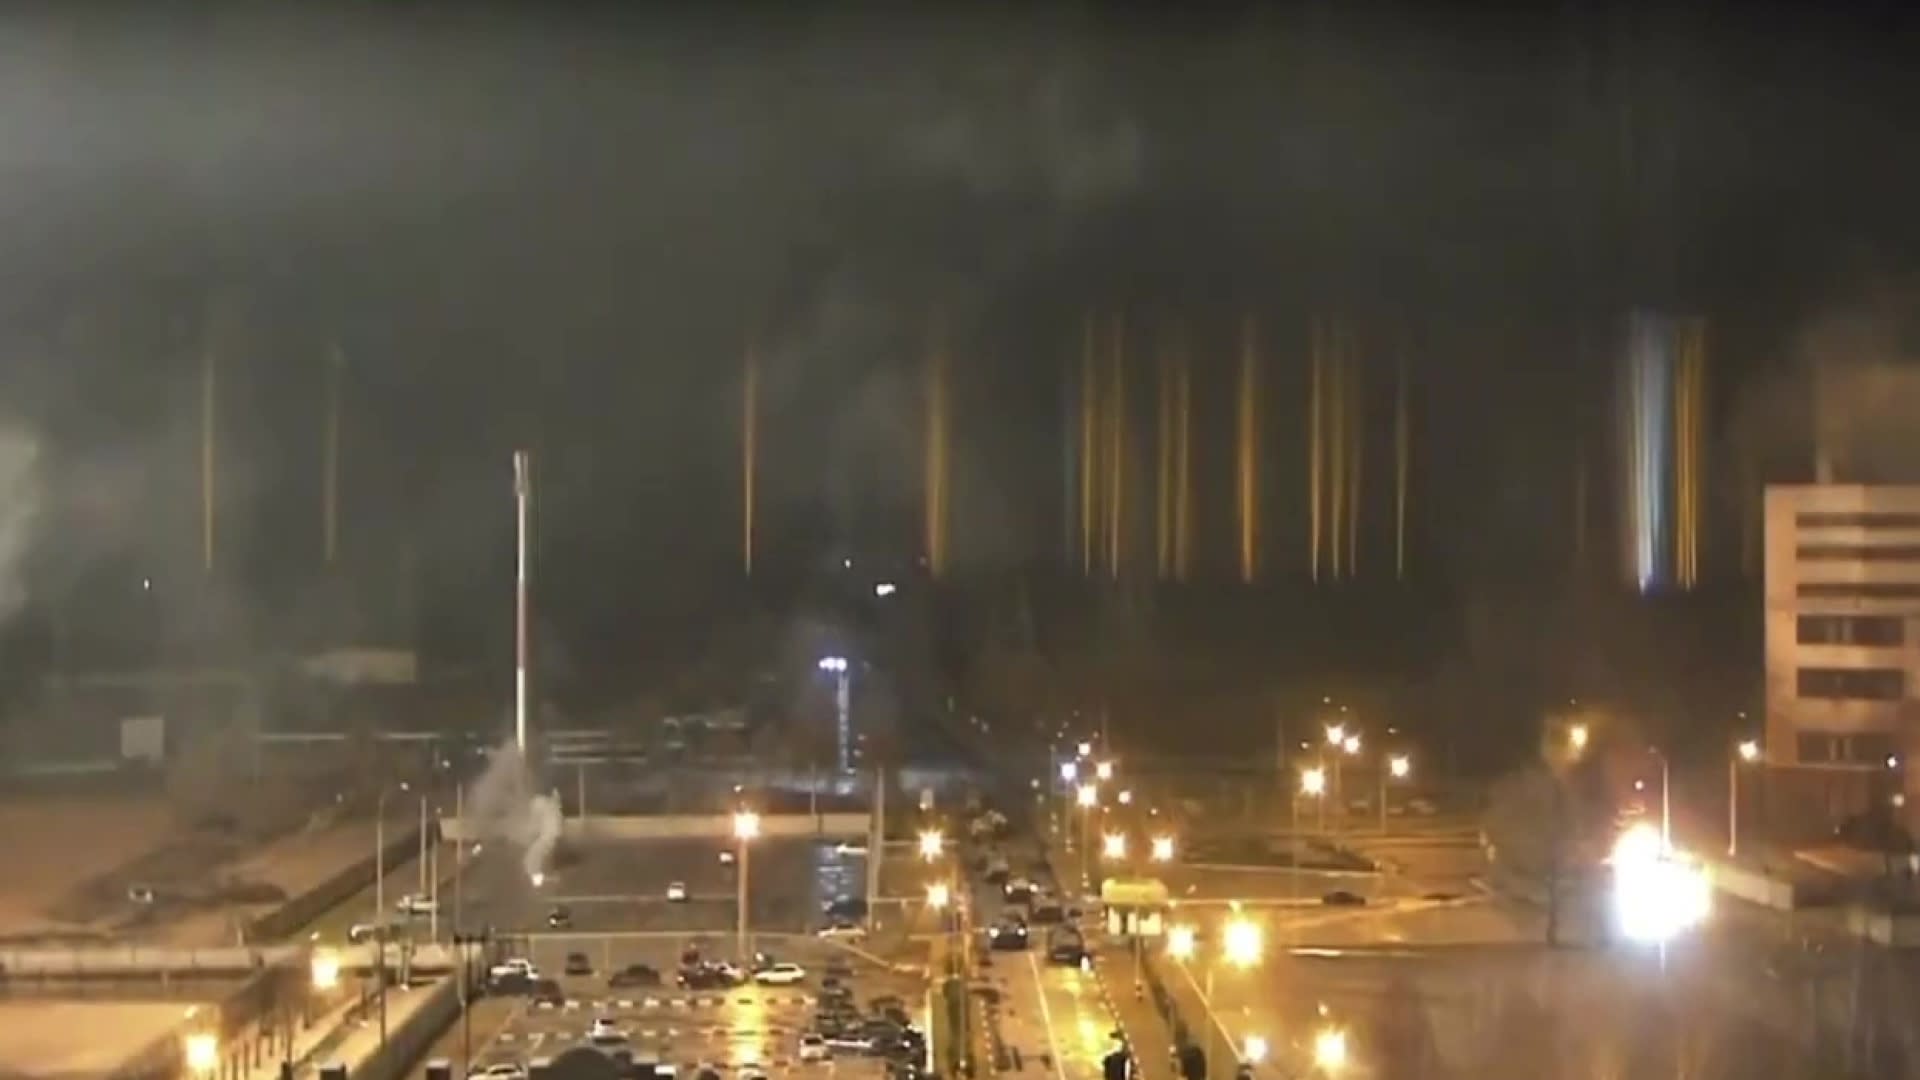 A screen grab captured from a video shows a view of Zaporizhzhia nuclear power plant during a fire following clashes around the site in Zaporizhzhia, Ukraine on March 4, 2022.